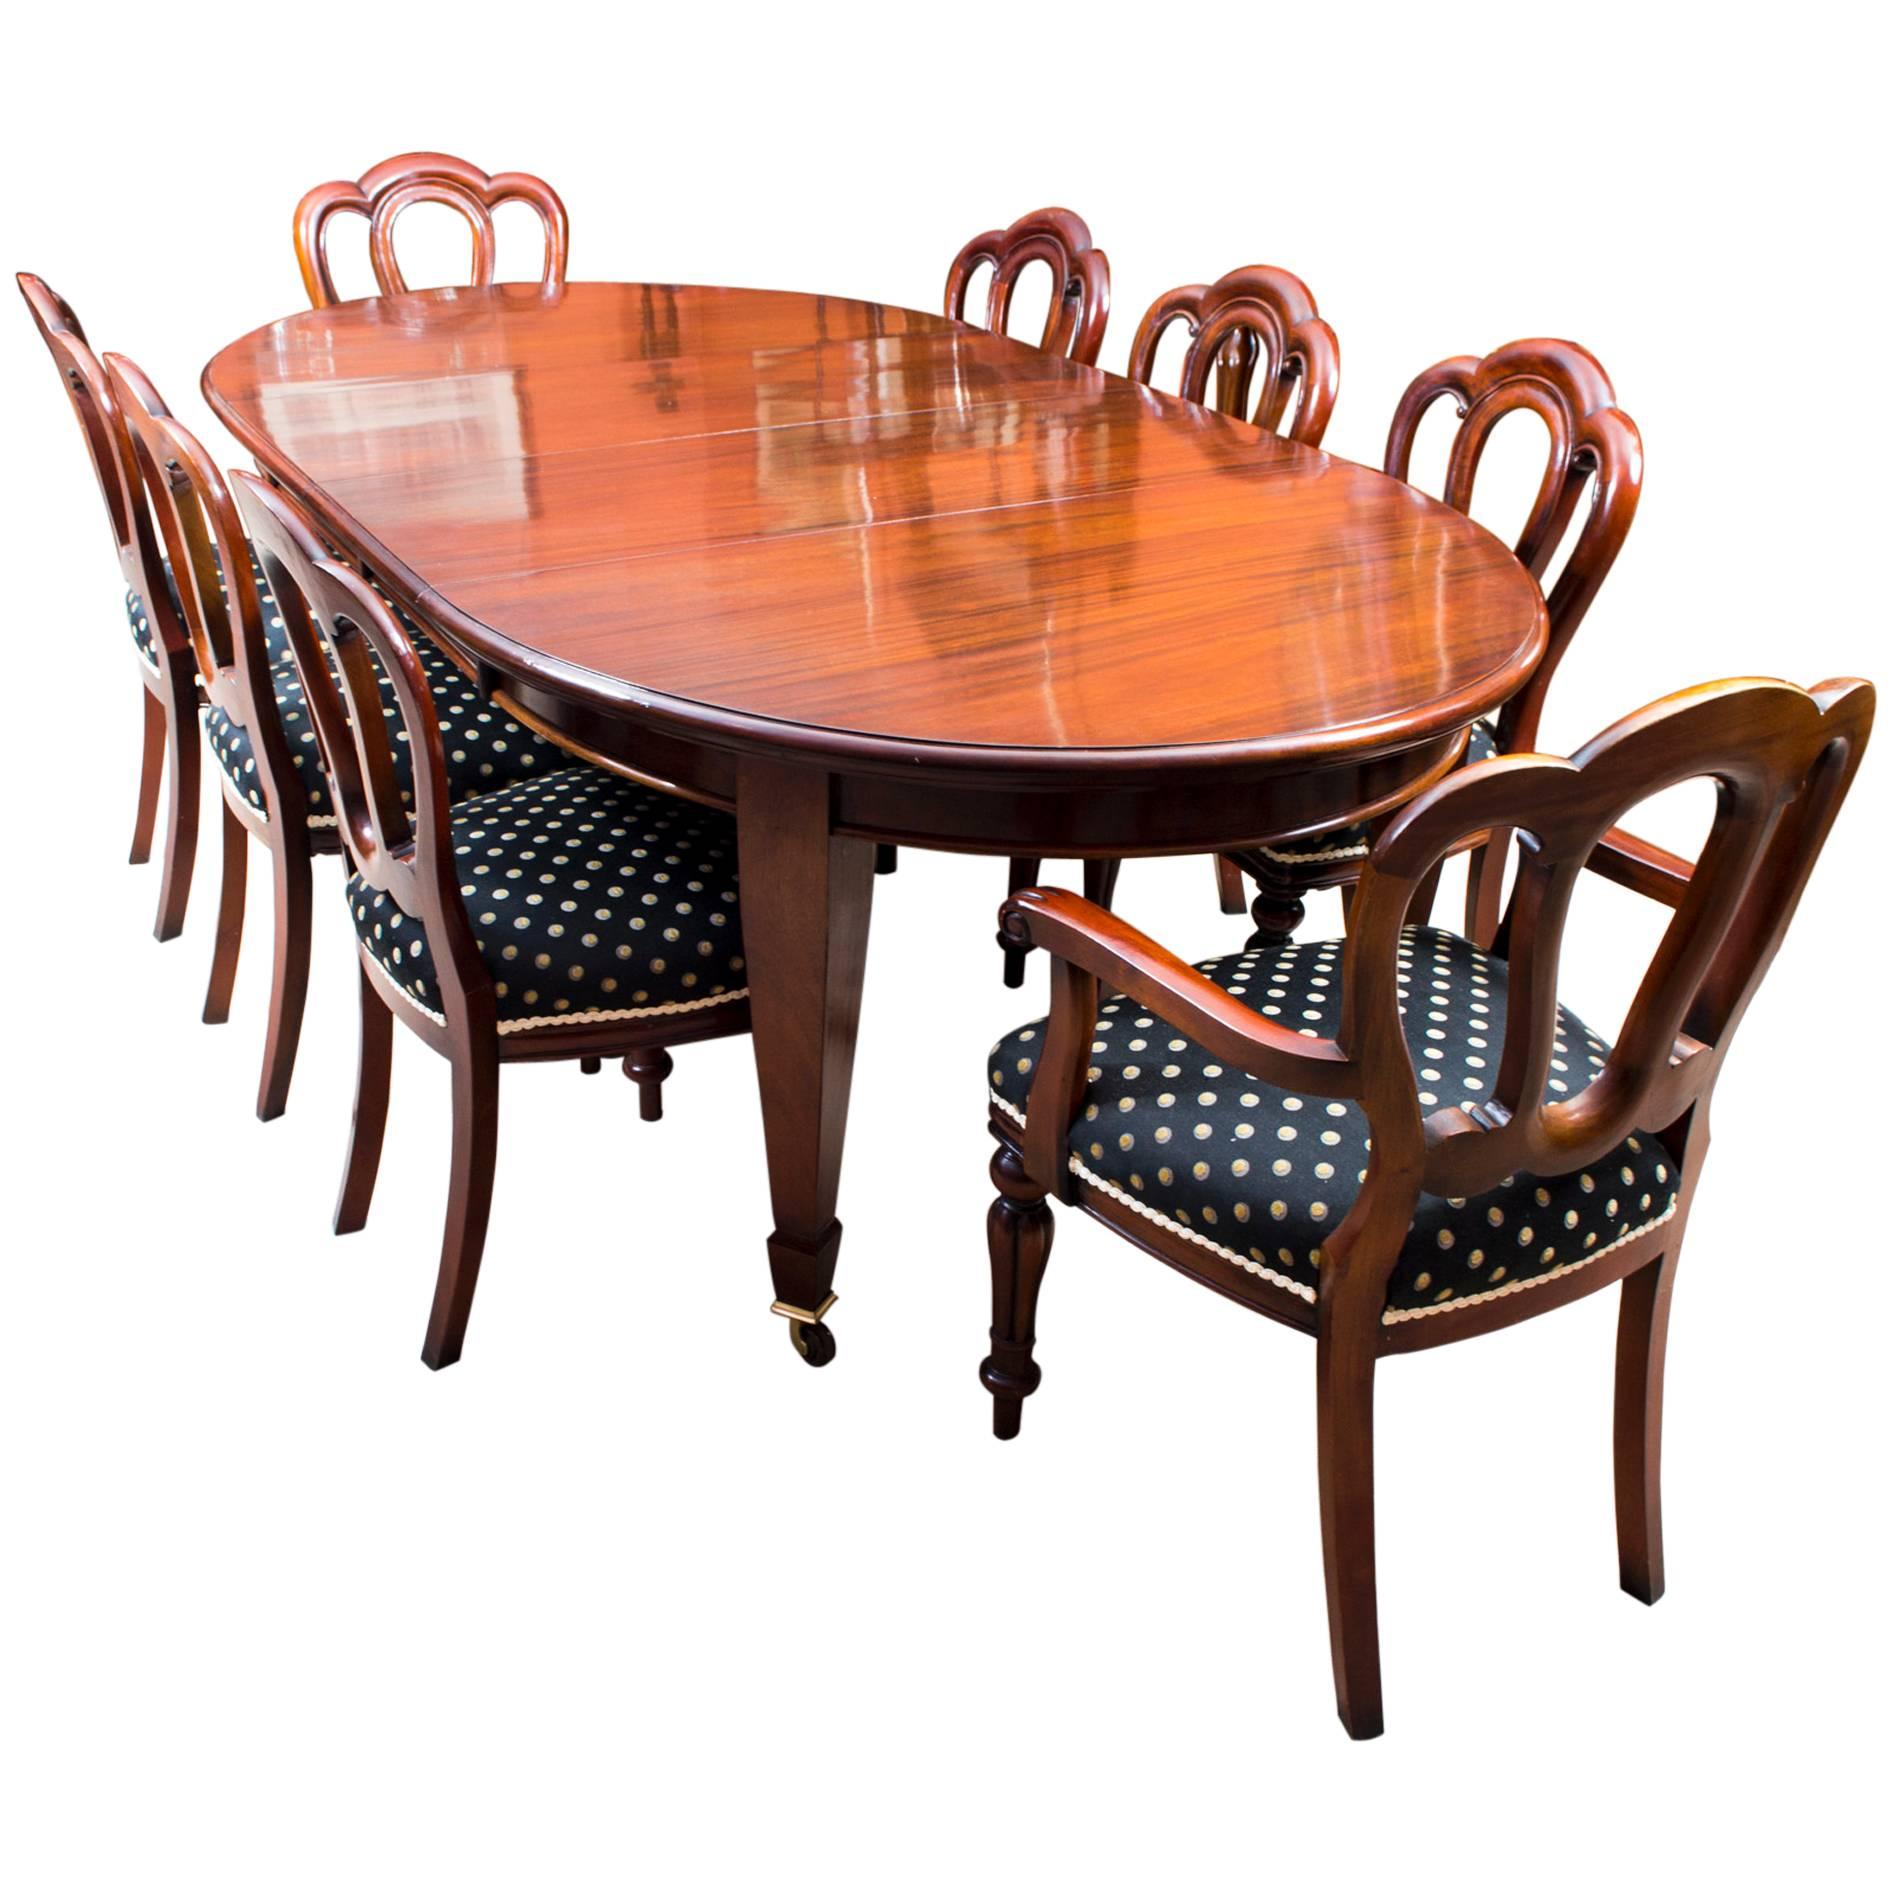 Antique Edwardian Dining Table Eight Chairs, circa 1900